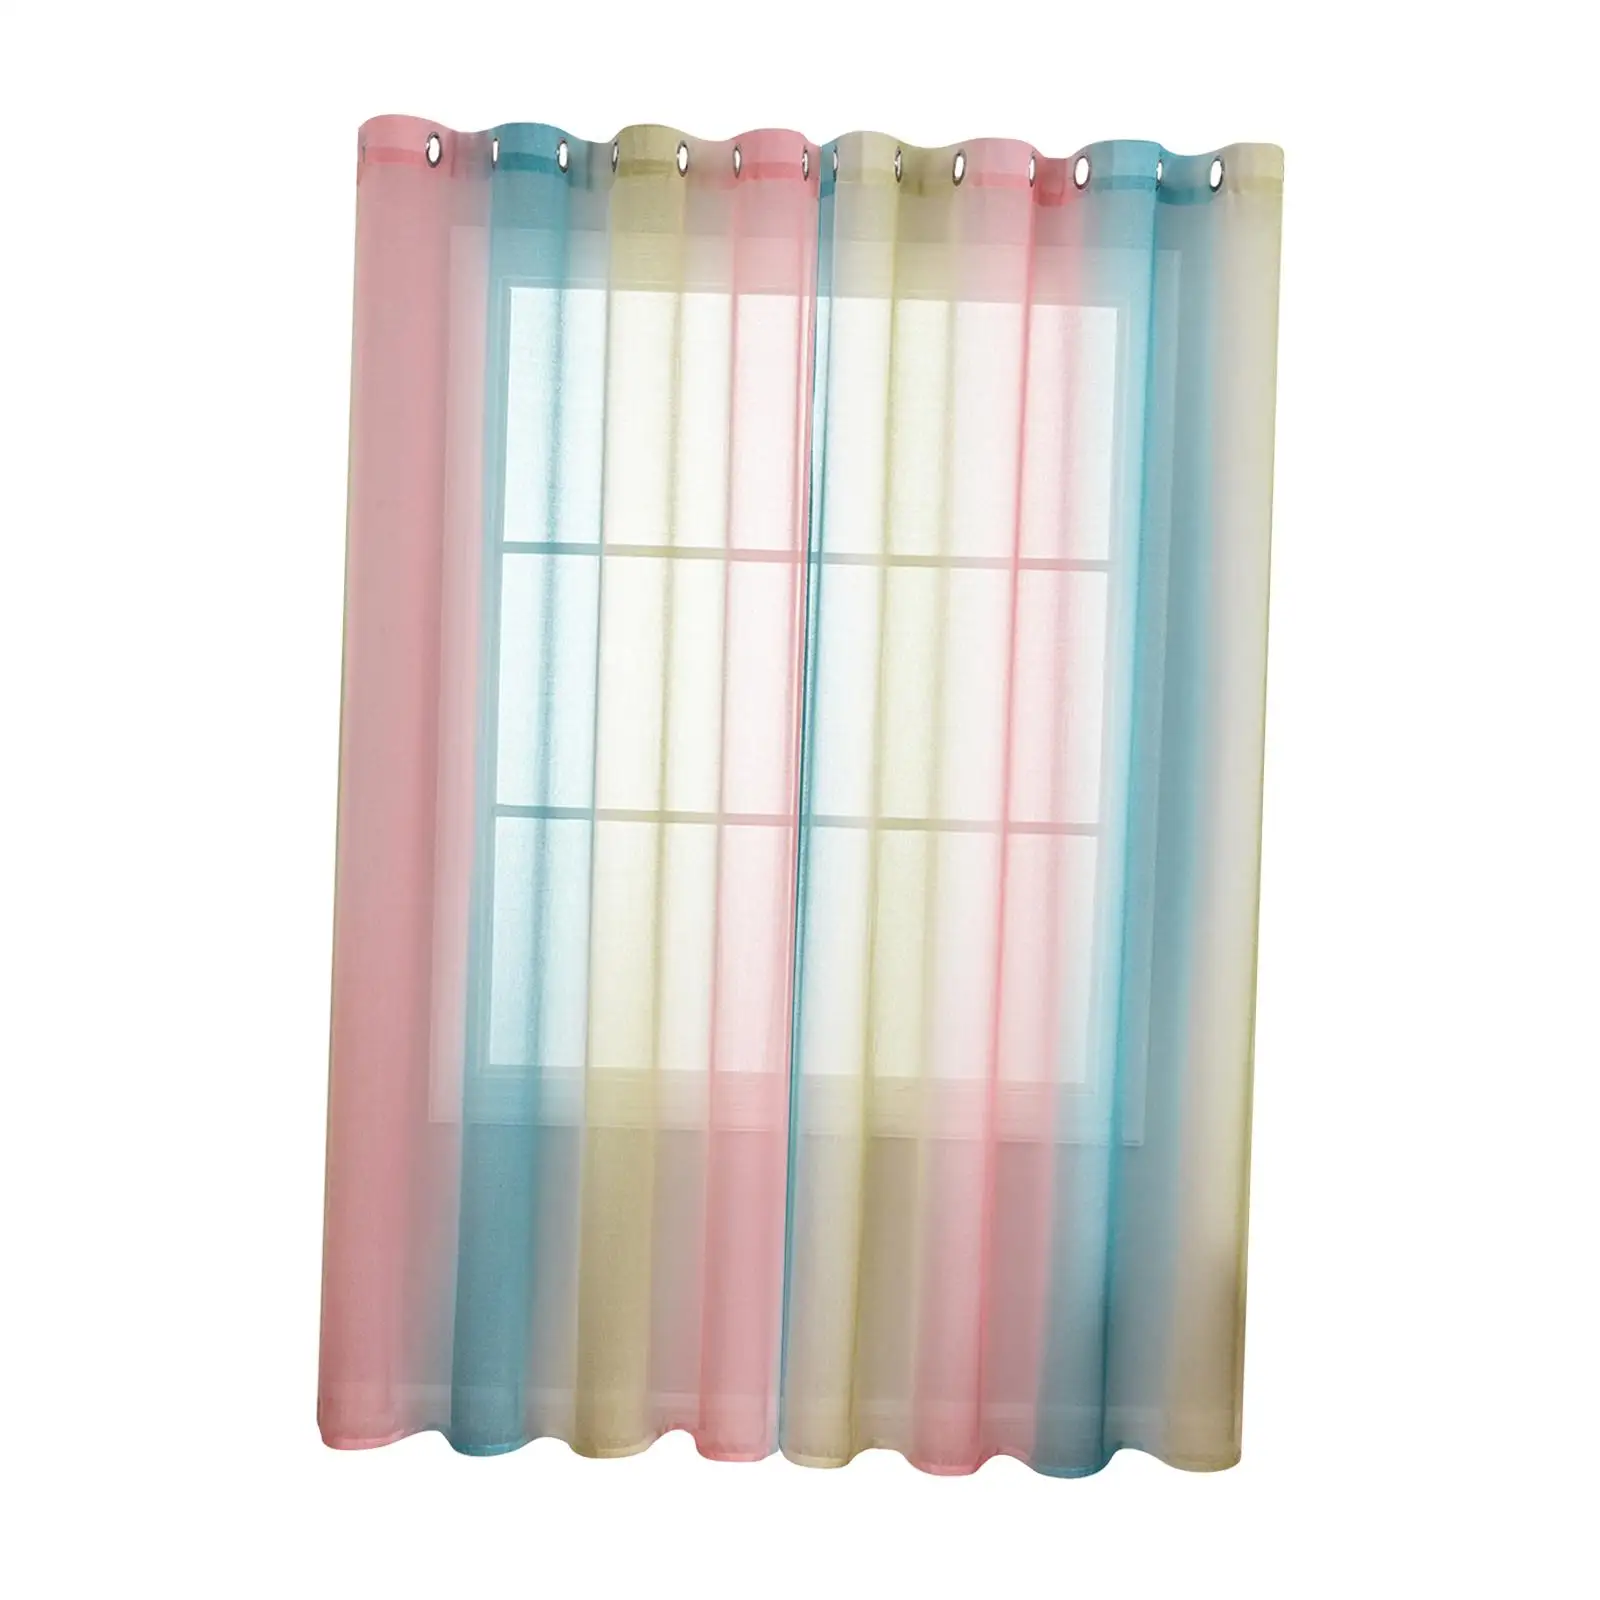 Transparent Voile Curtain Window Tulle Curtain for Sliding Glass Door Window